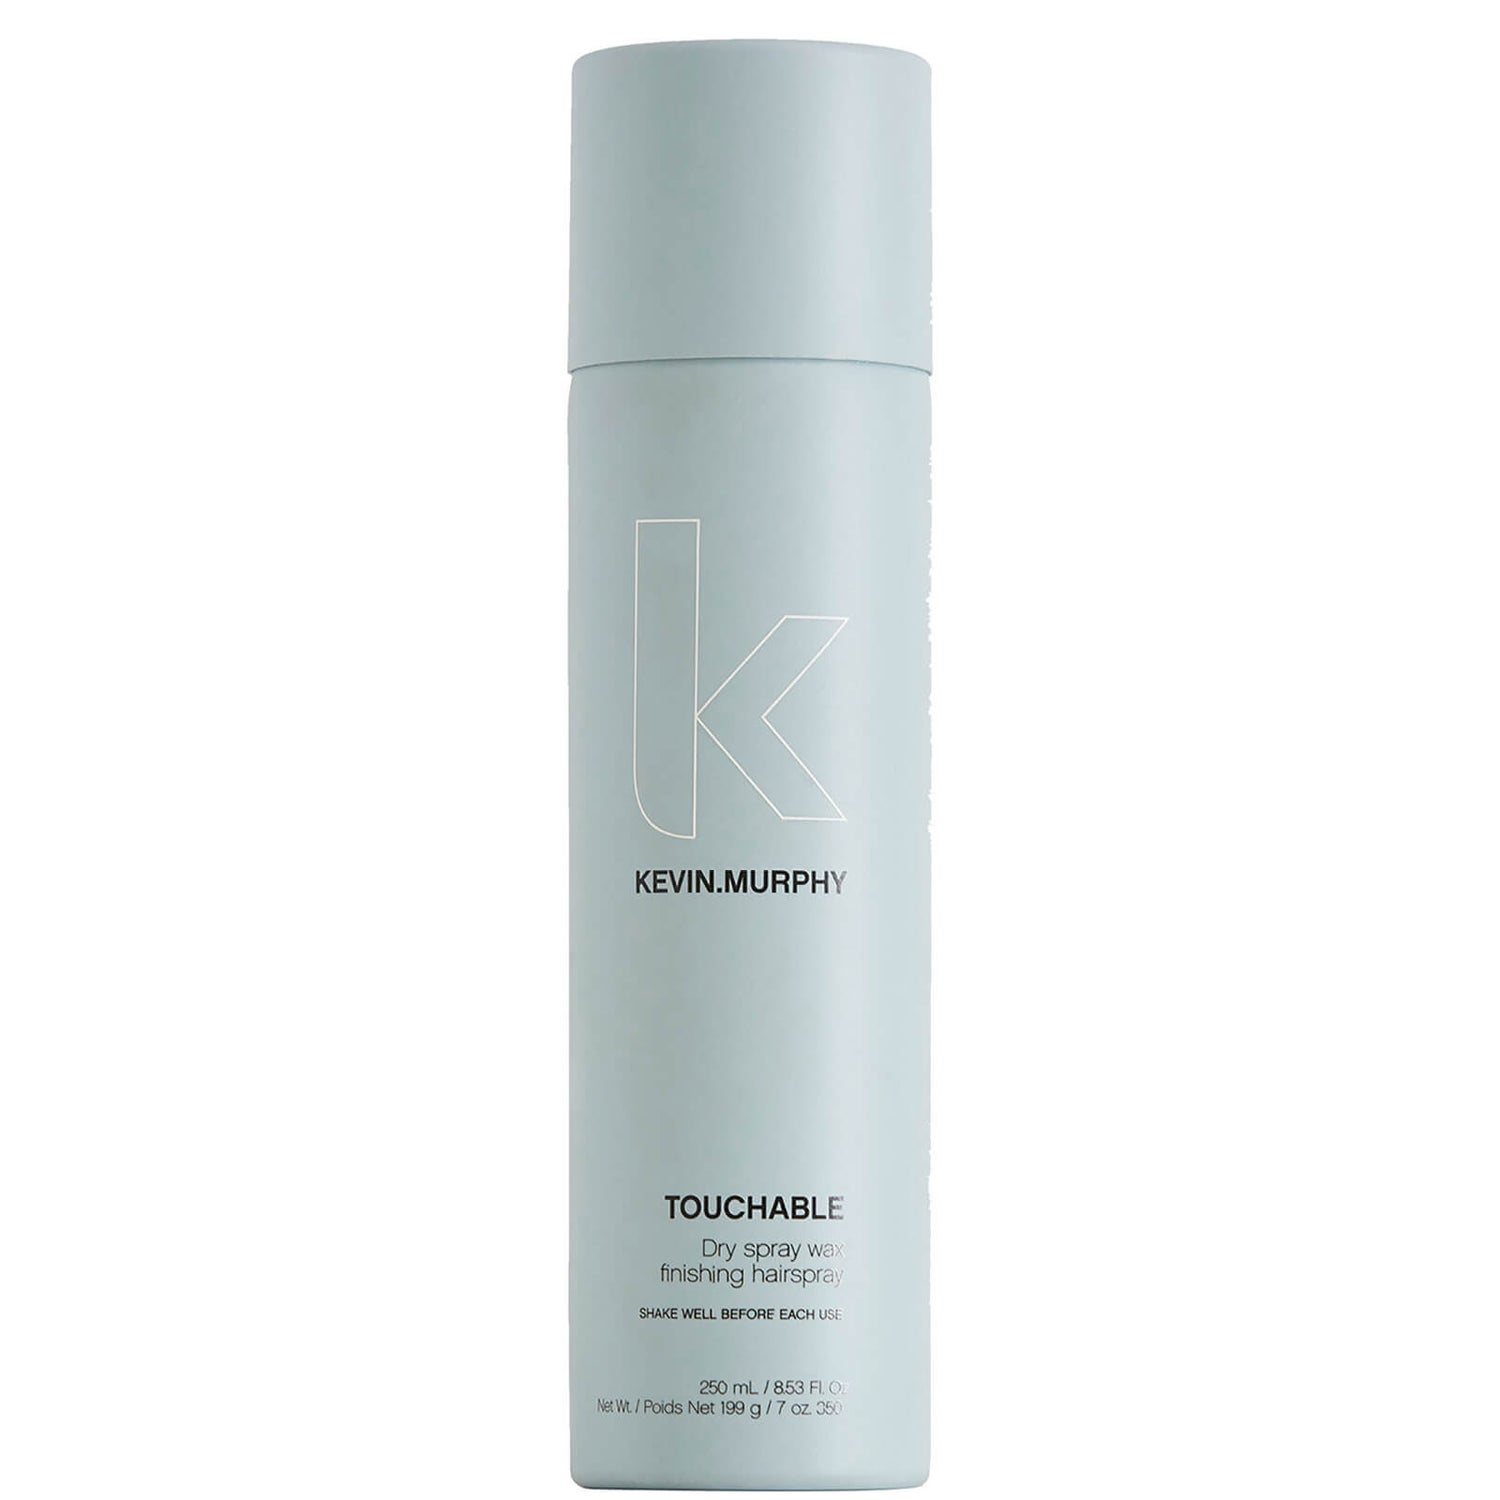 KEVIN.MURPHY Touchable Spray 250ml